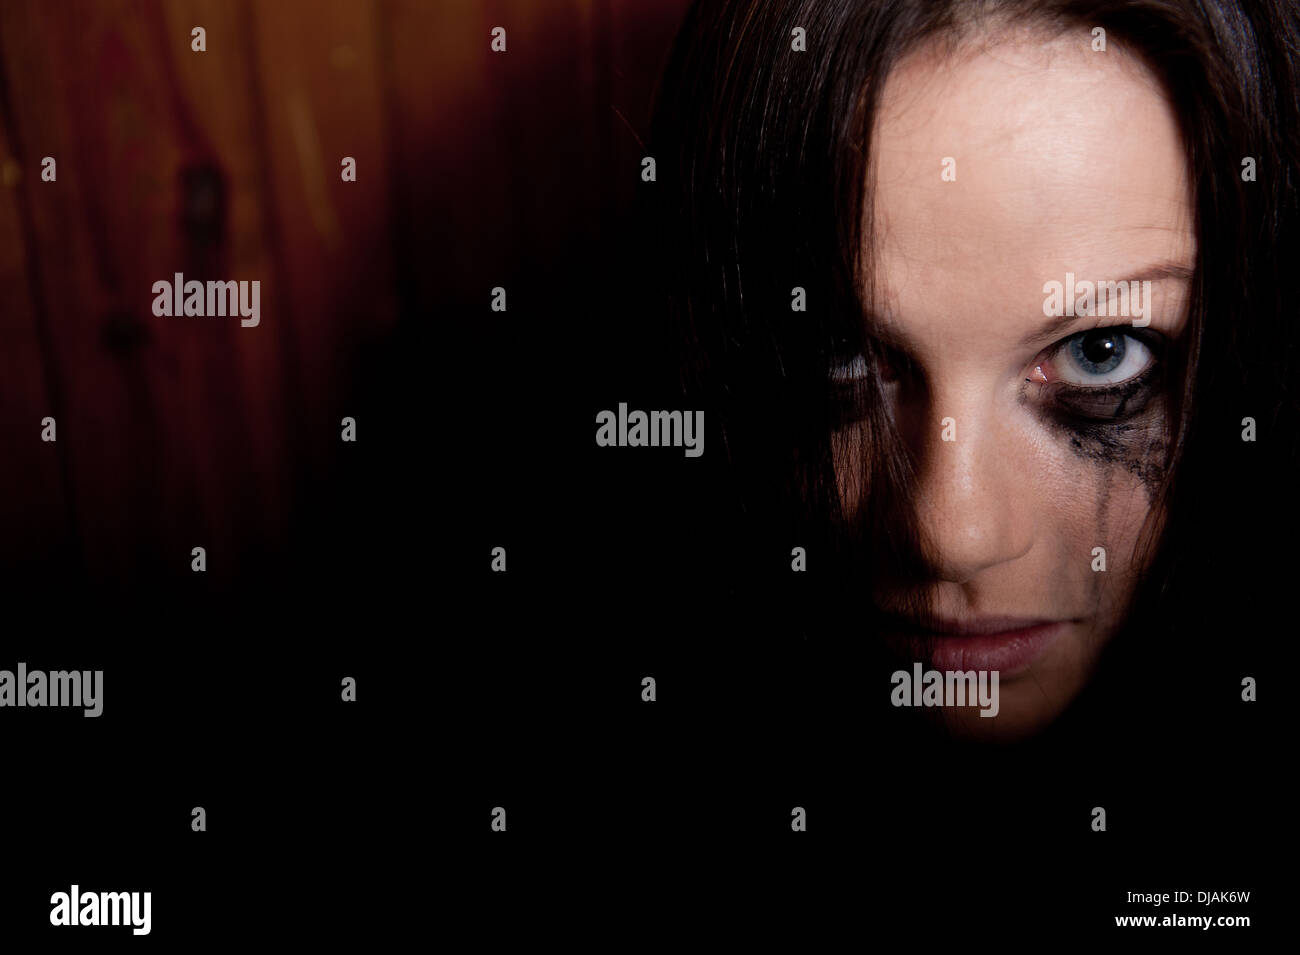 Tearful young woman with her make-up running down her face. Stock Photo